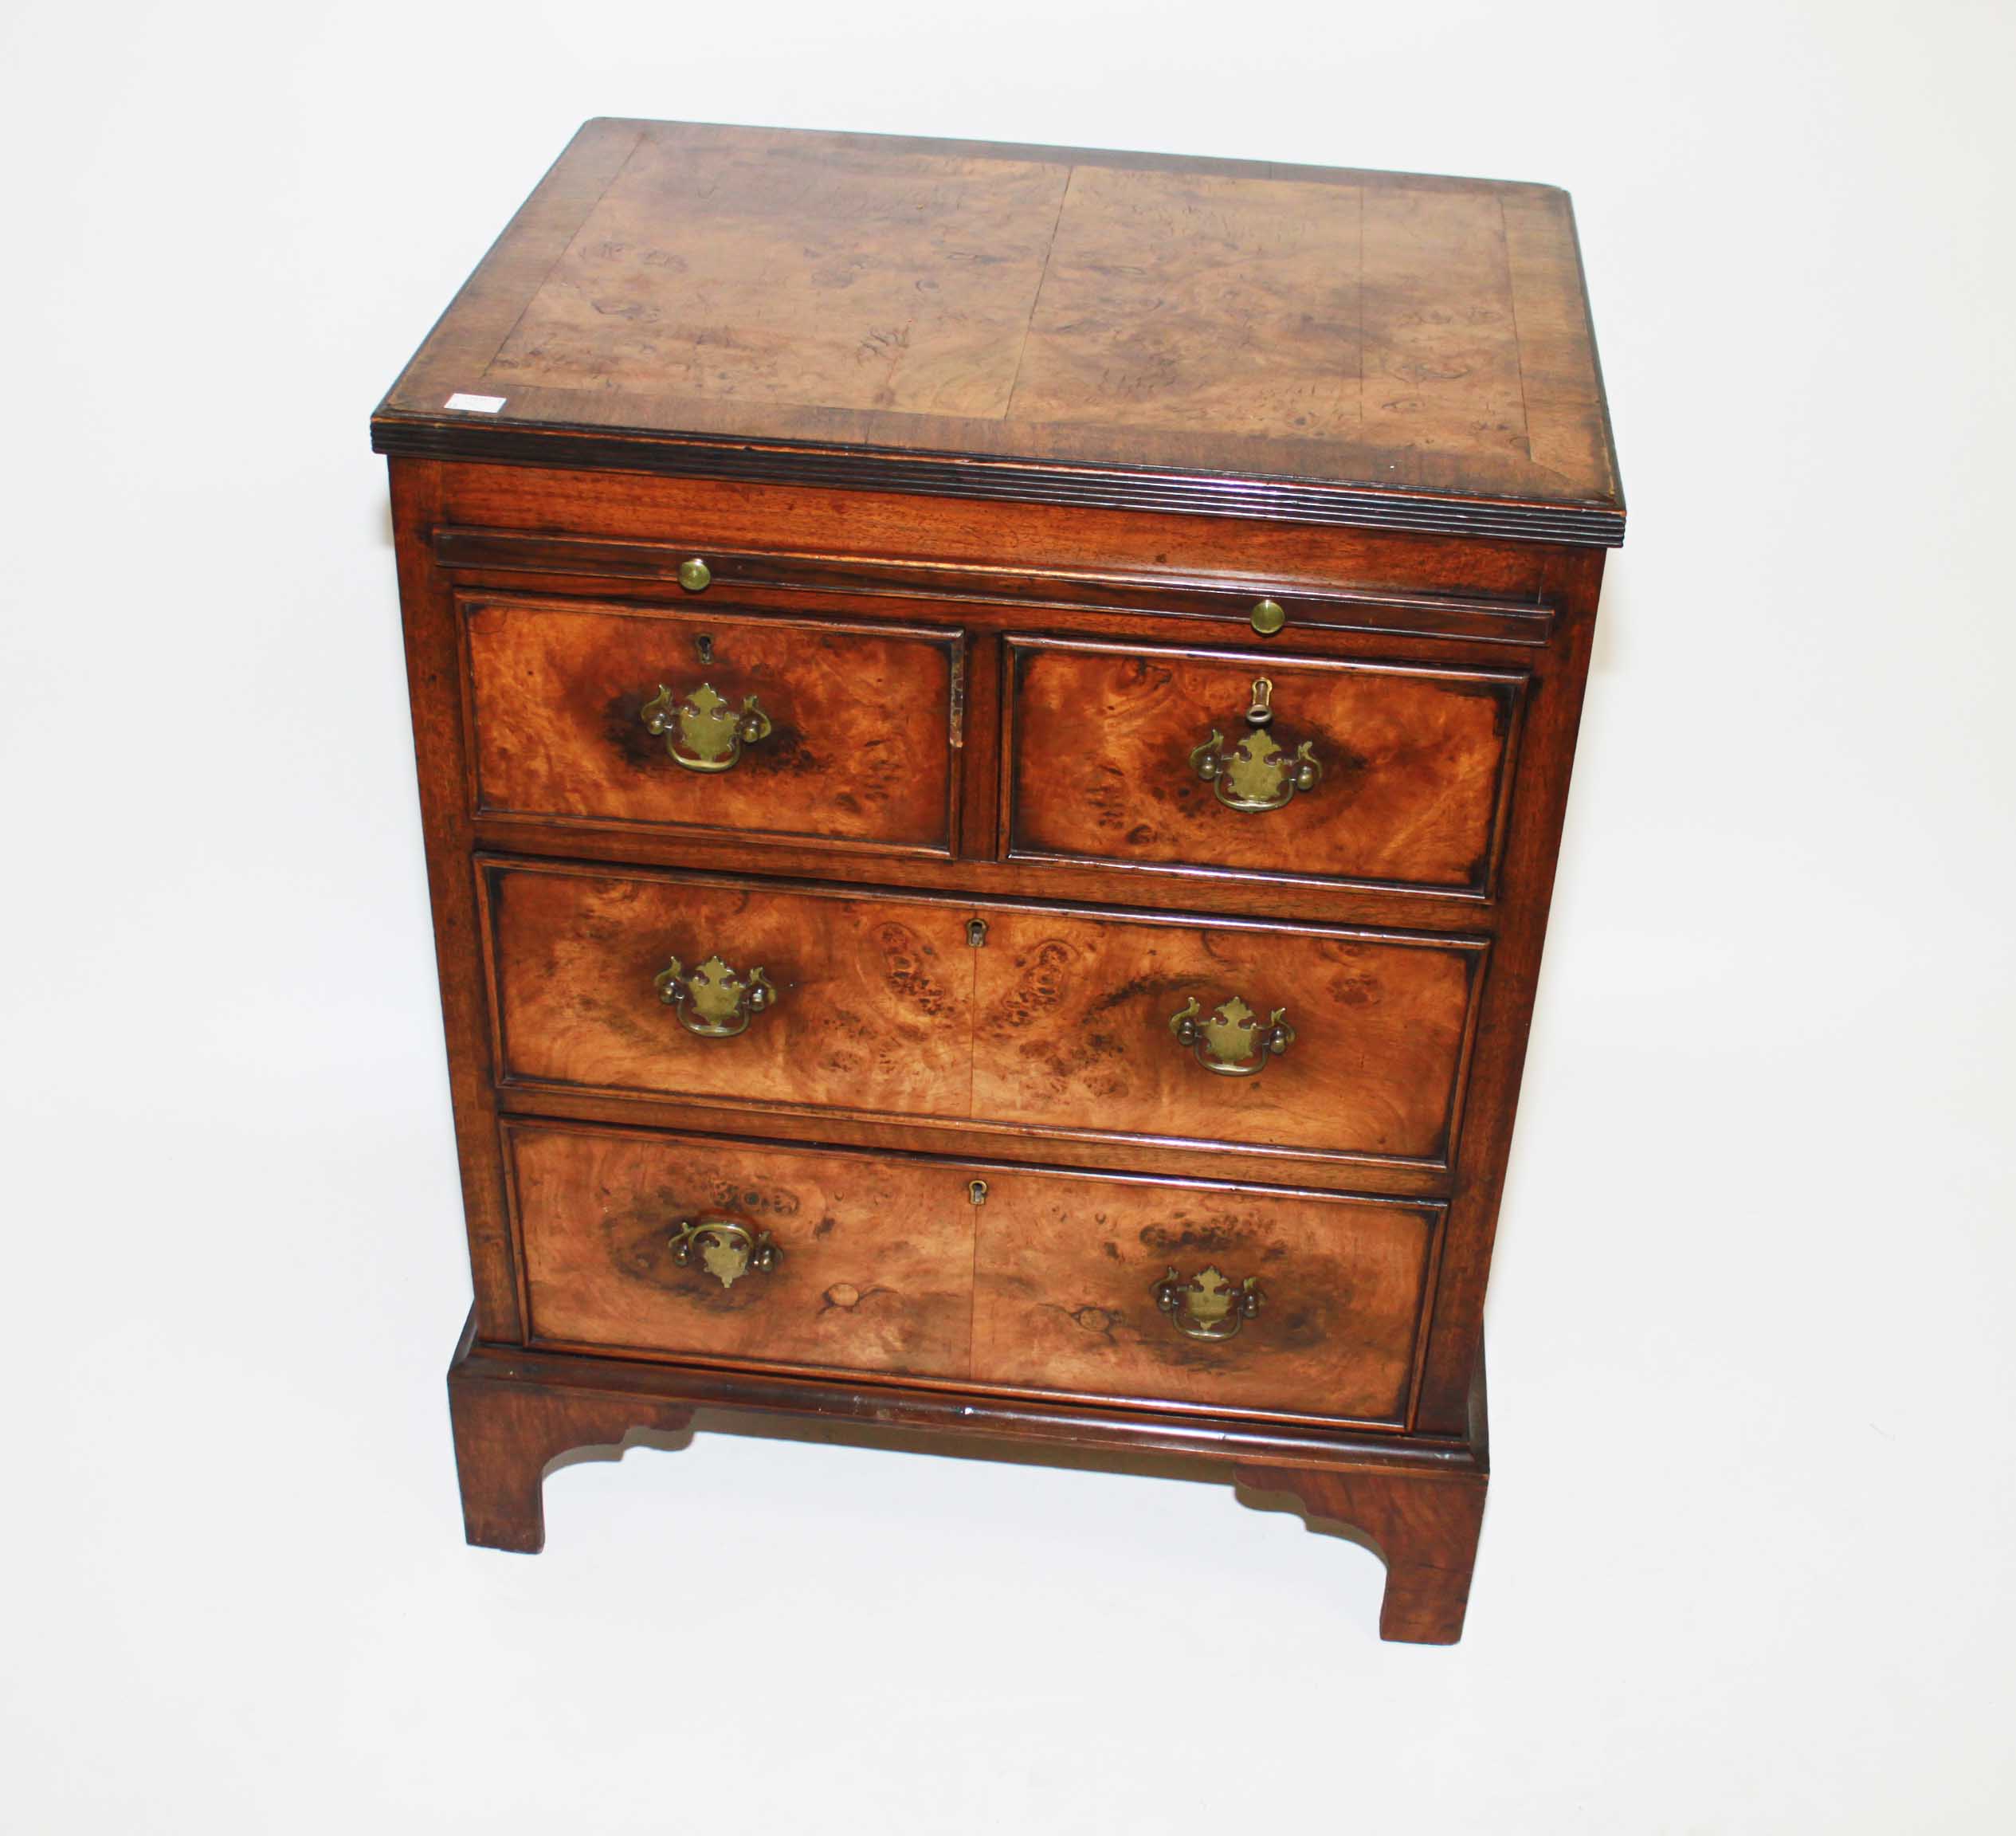 A WALNUT AND CROSS BANDED CHEST,
in the early 18th century style, and of small proportions, with a